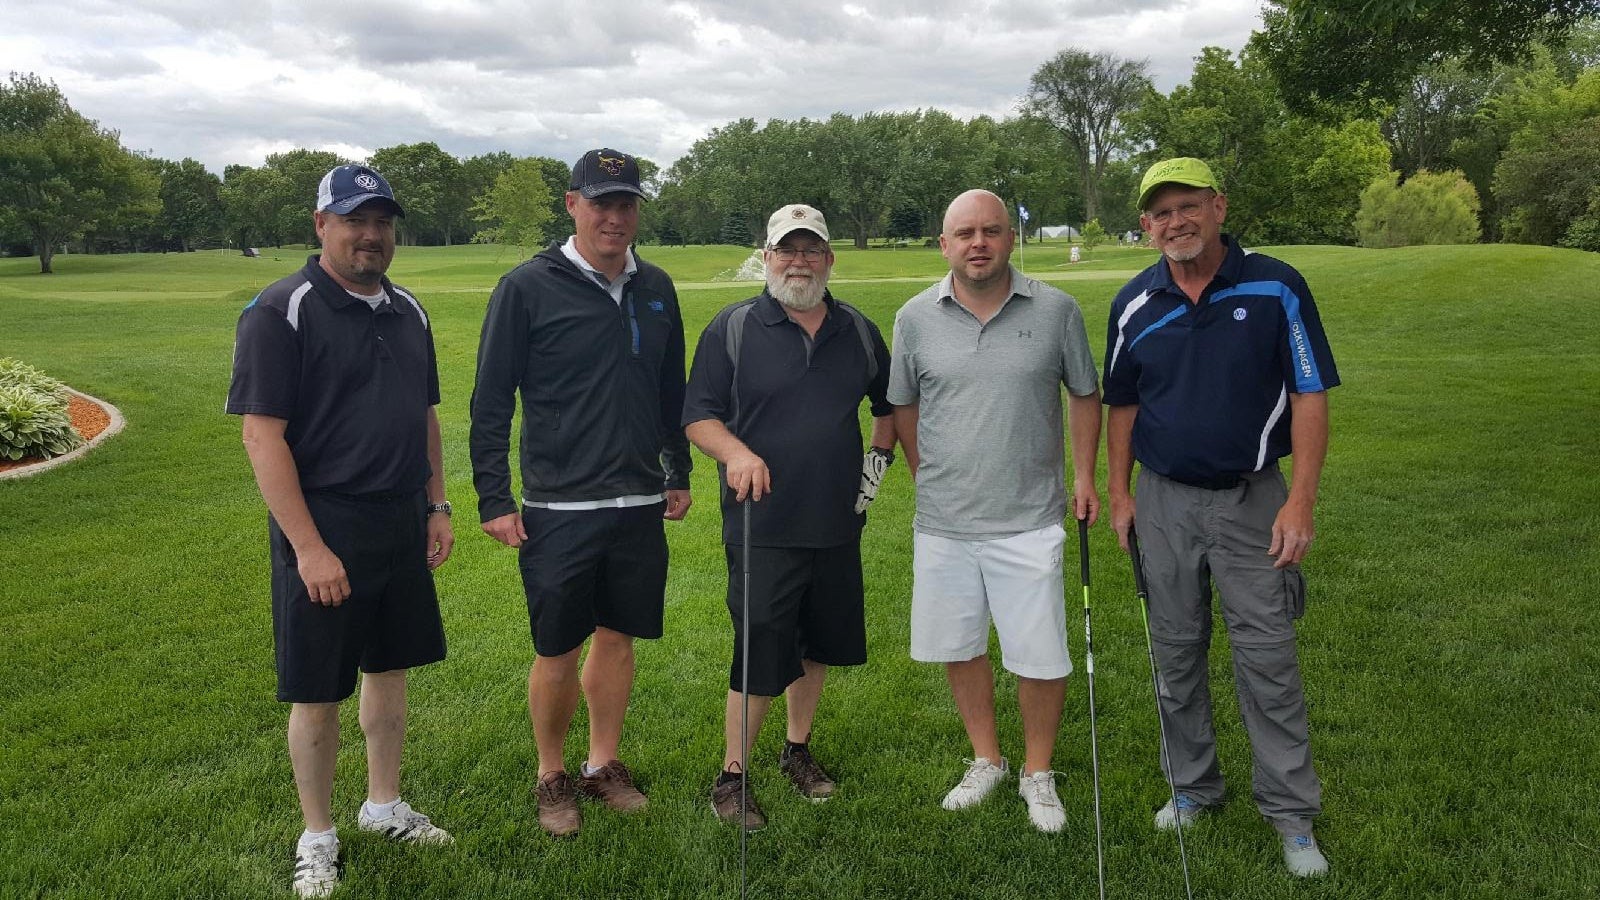 Mankato Motors supports area organizations through golf outings